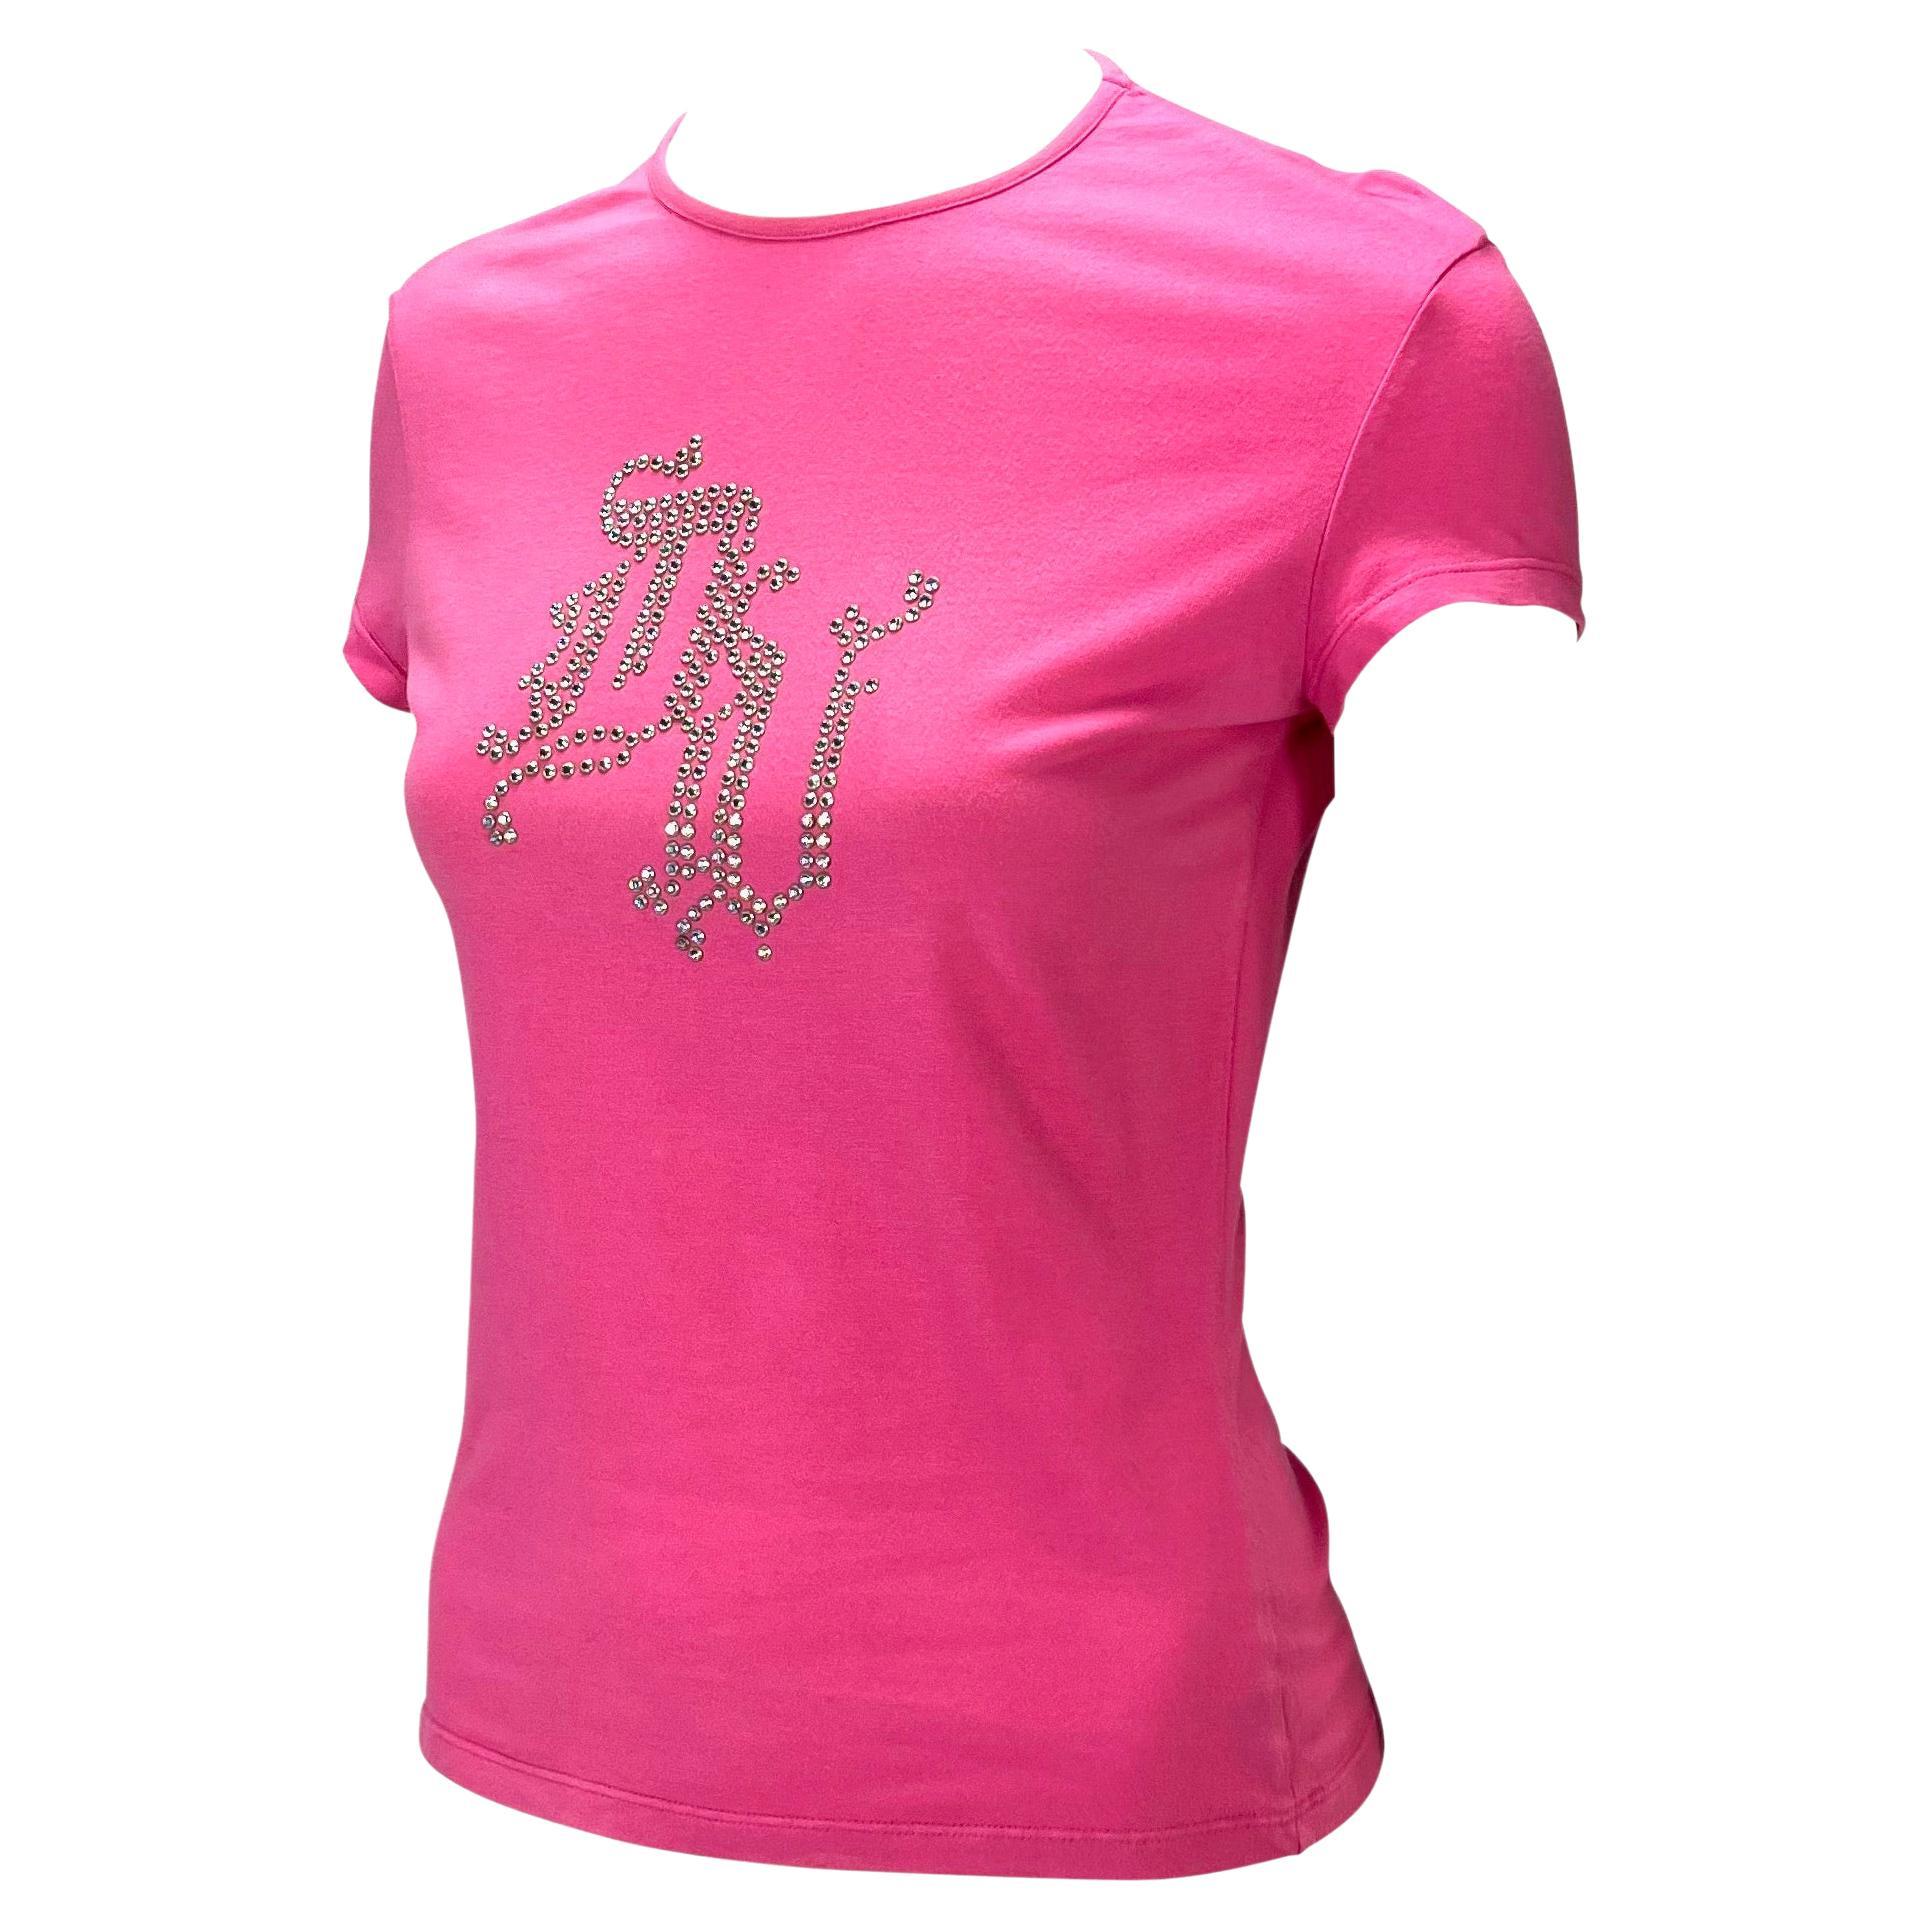 Presenting a pink fitted Versace t-shirt designed by Donatella in the early 2000s. The bust features rhinestone stud embroidery to form Donatella's DV monogram logo. This piece is a fabulous representation of Donatella's ability to honor her